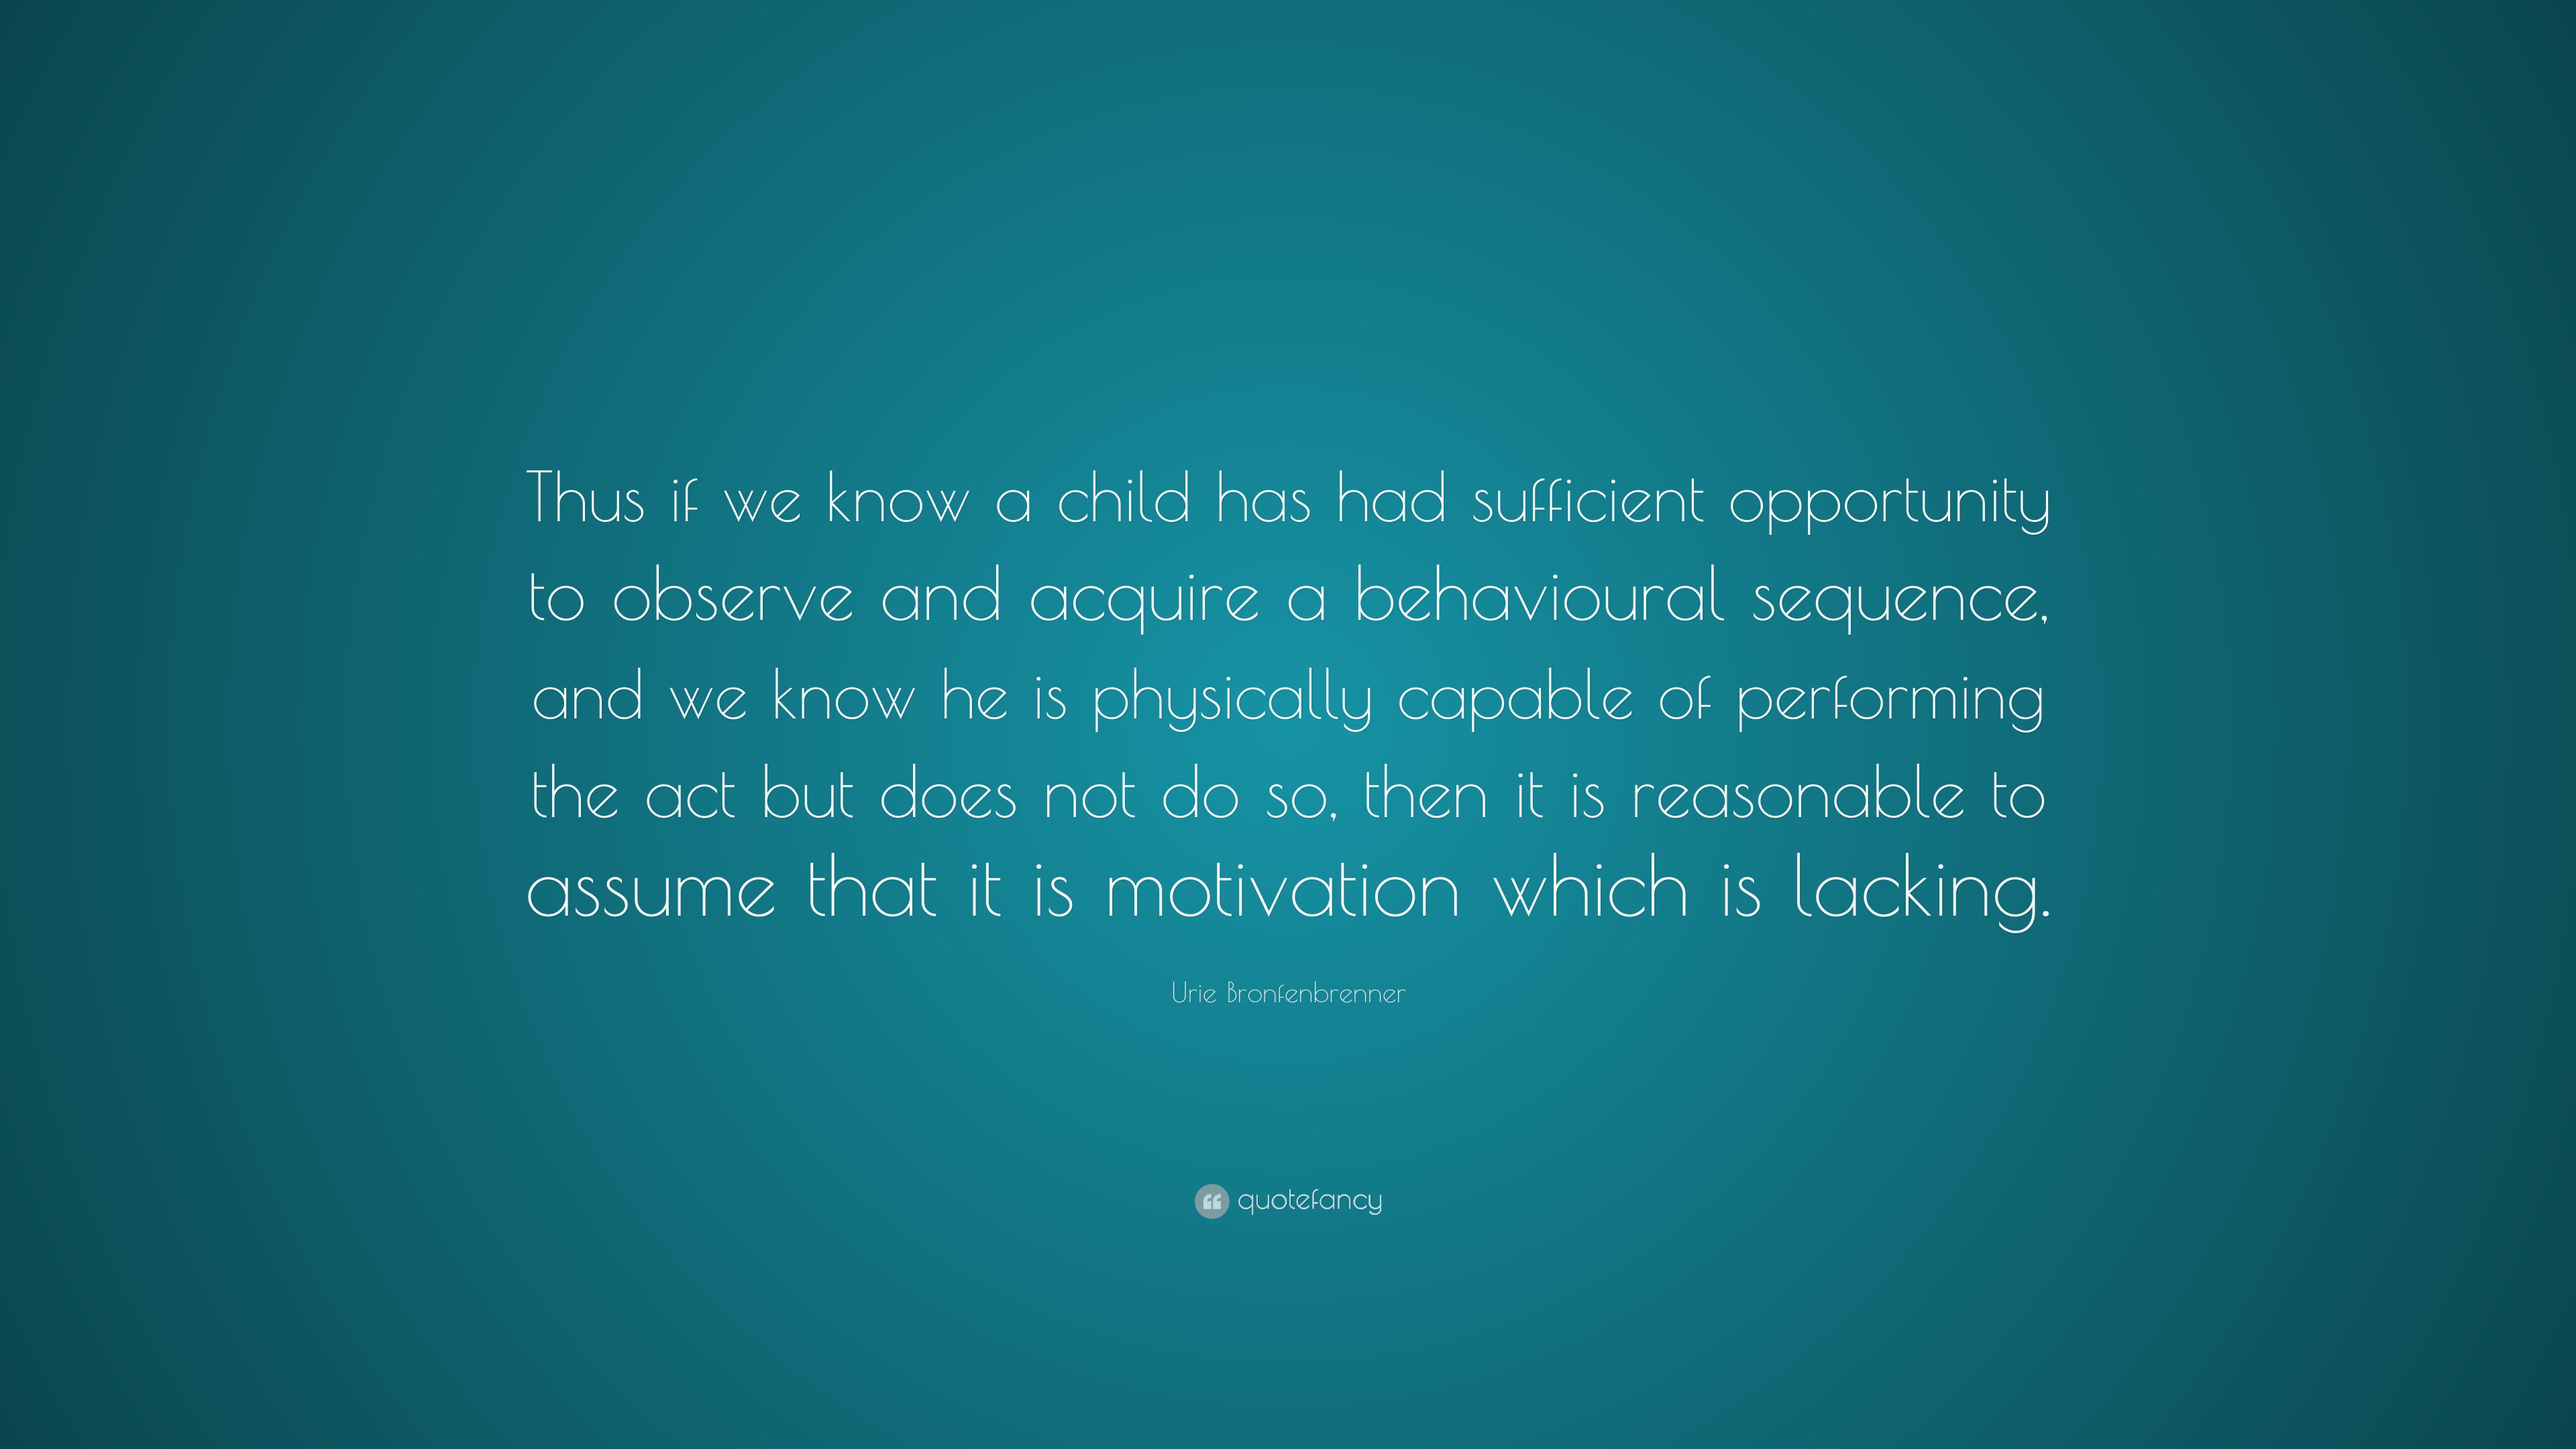 Urie Bronfenbrenner Quote: “Thus if we know a child has had sufficient ...